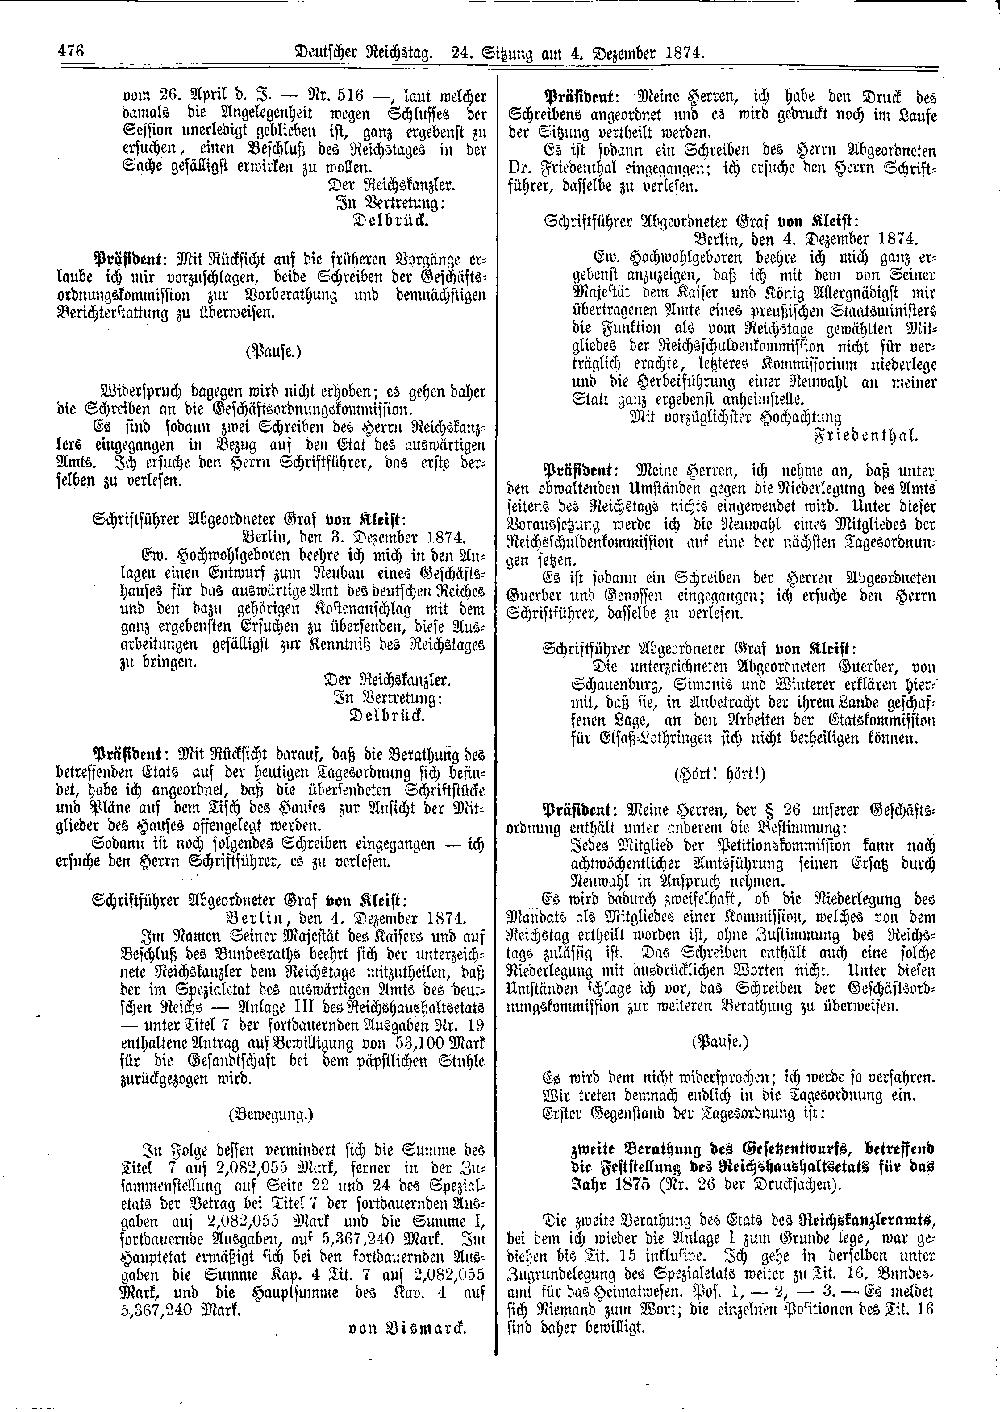 Scan of page 476